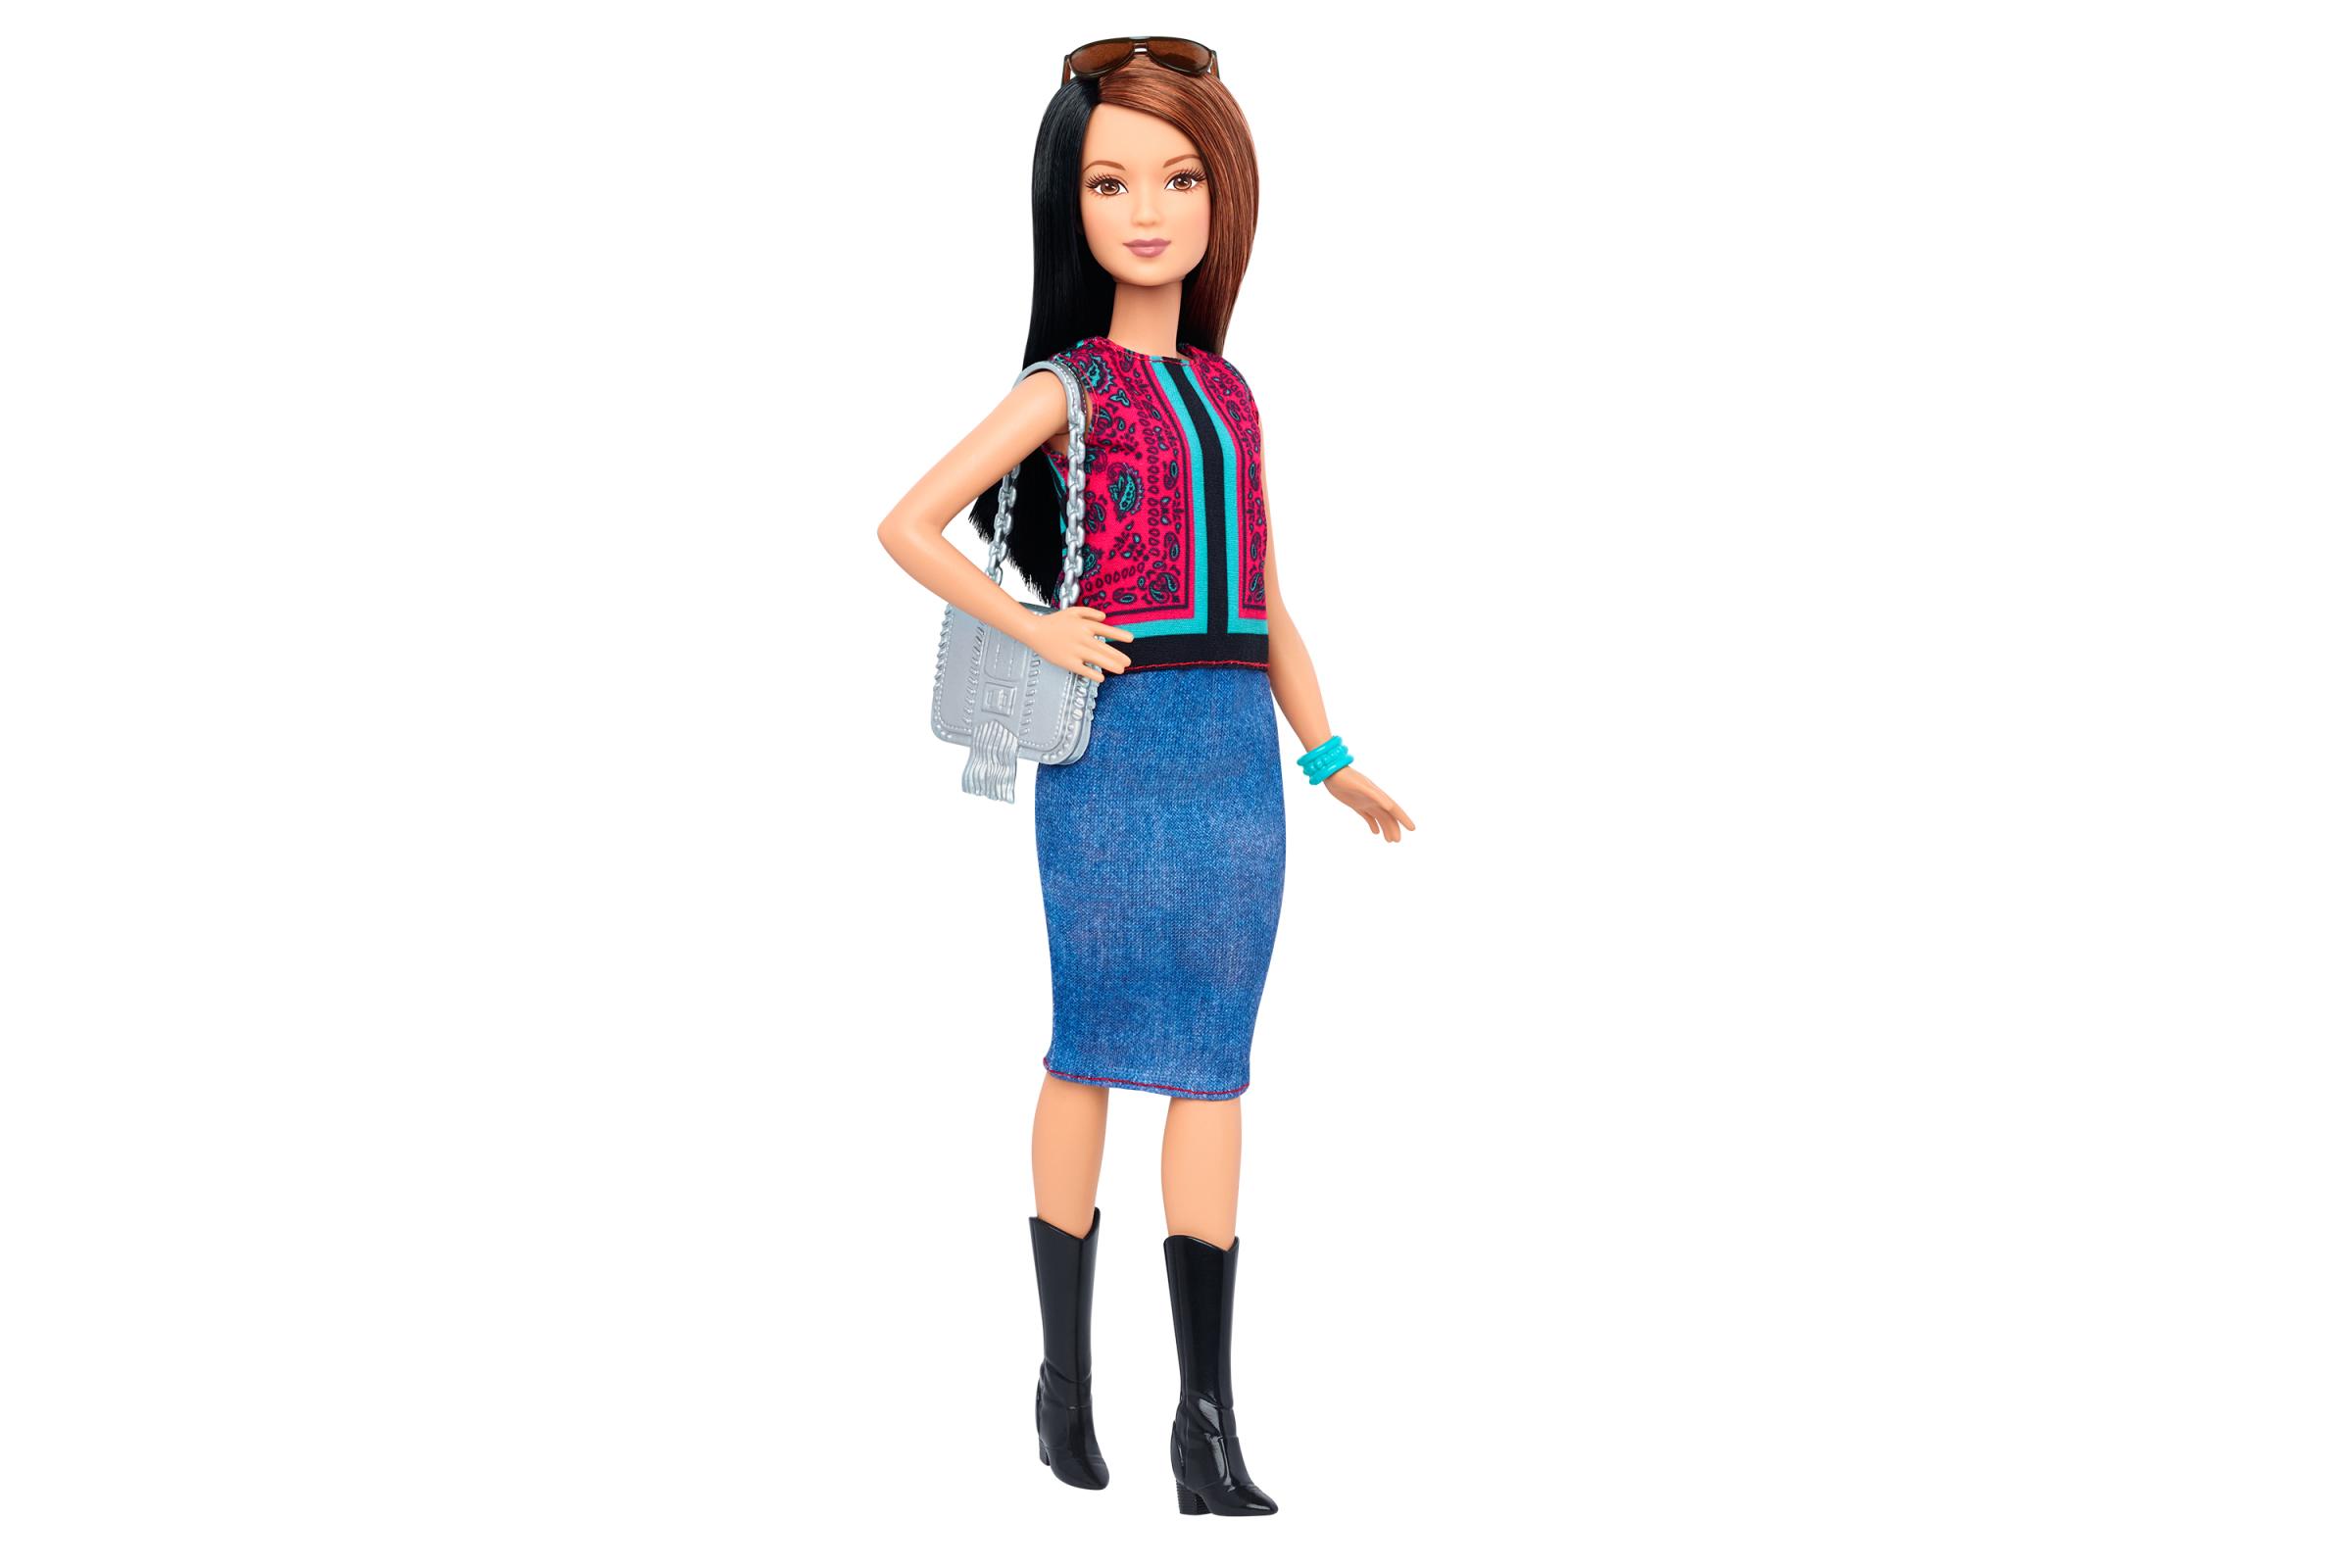 One of Mattel's new Petite Barbies